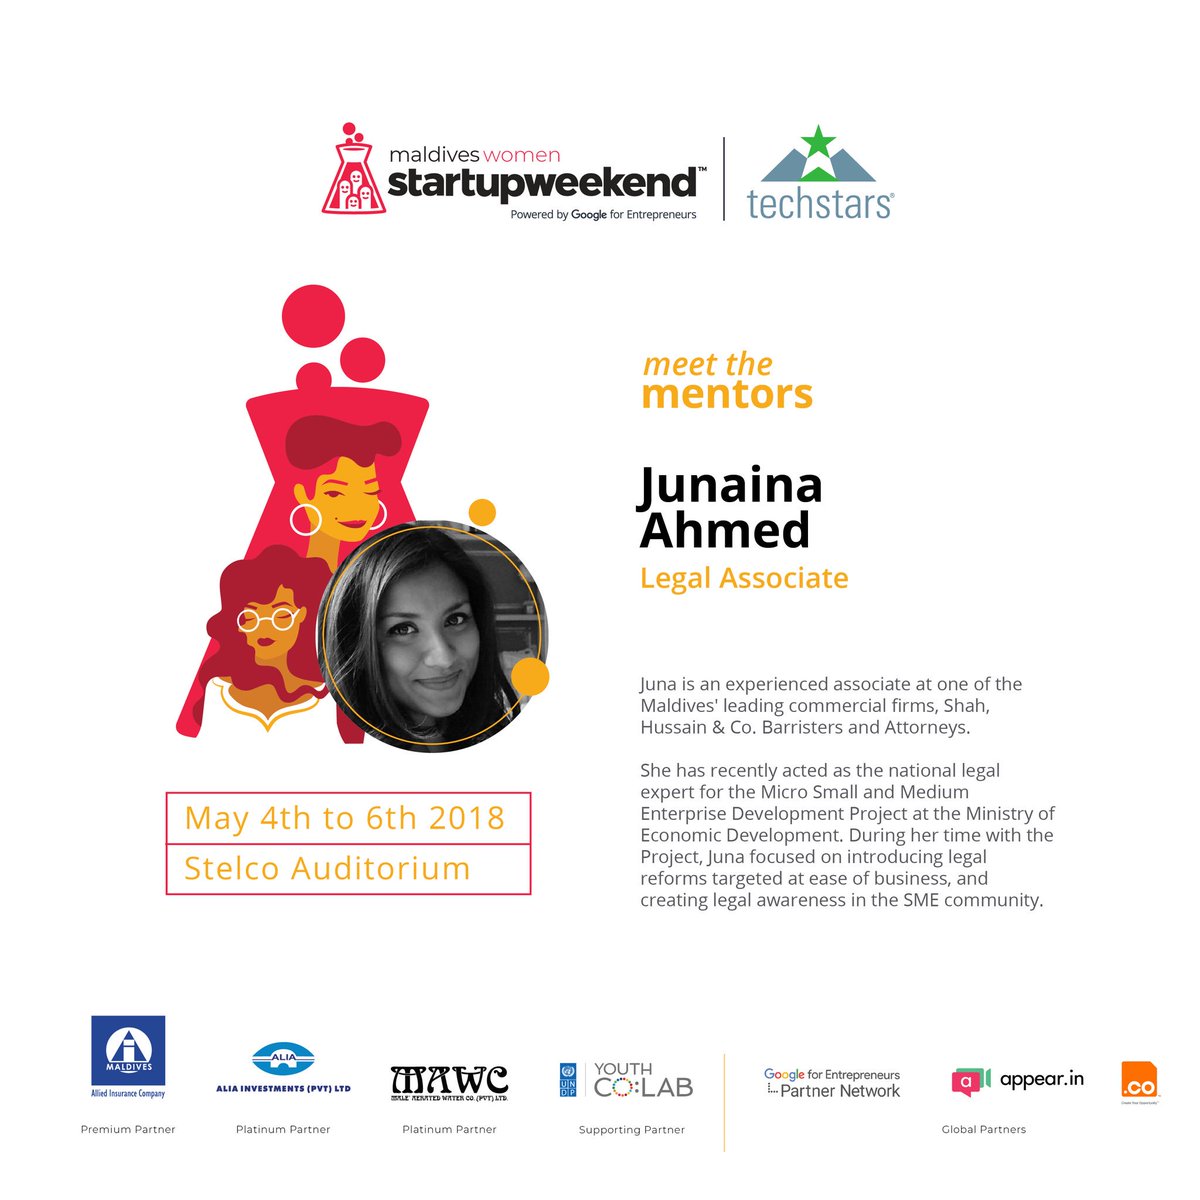 #meetthementors 

Keep all your legal questions ready and make sure to book sometime from Junaina during the event. 

#HingaaFashamaa #SWMaldives